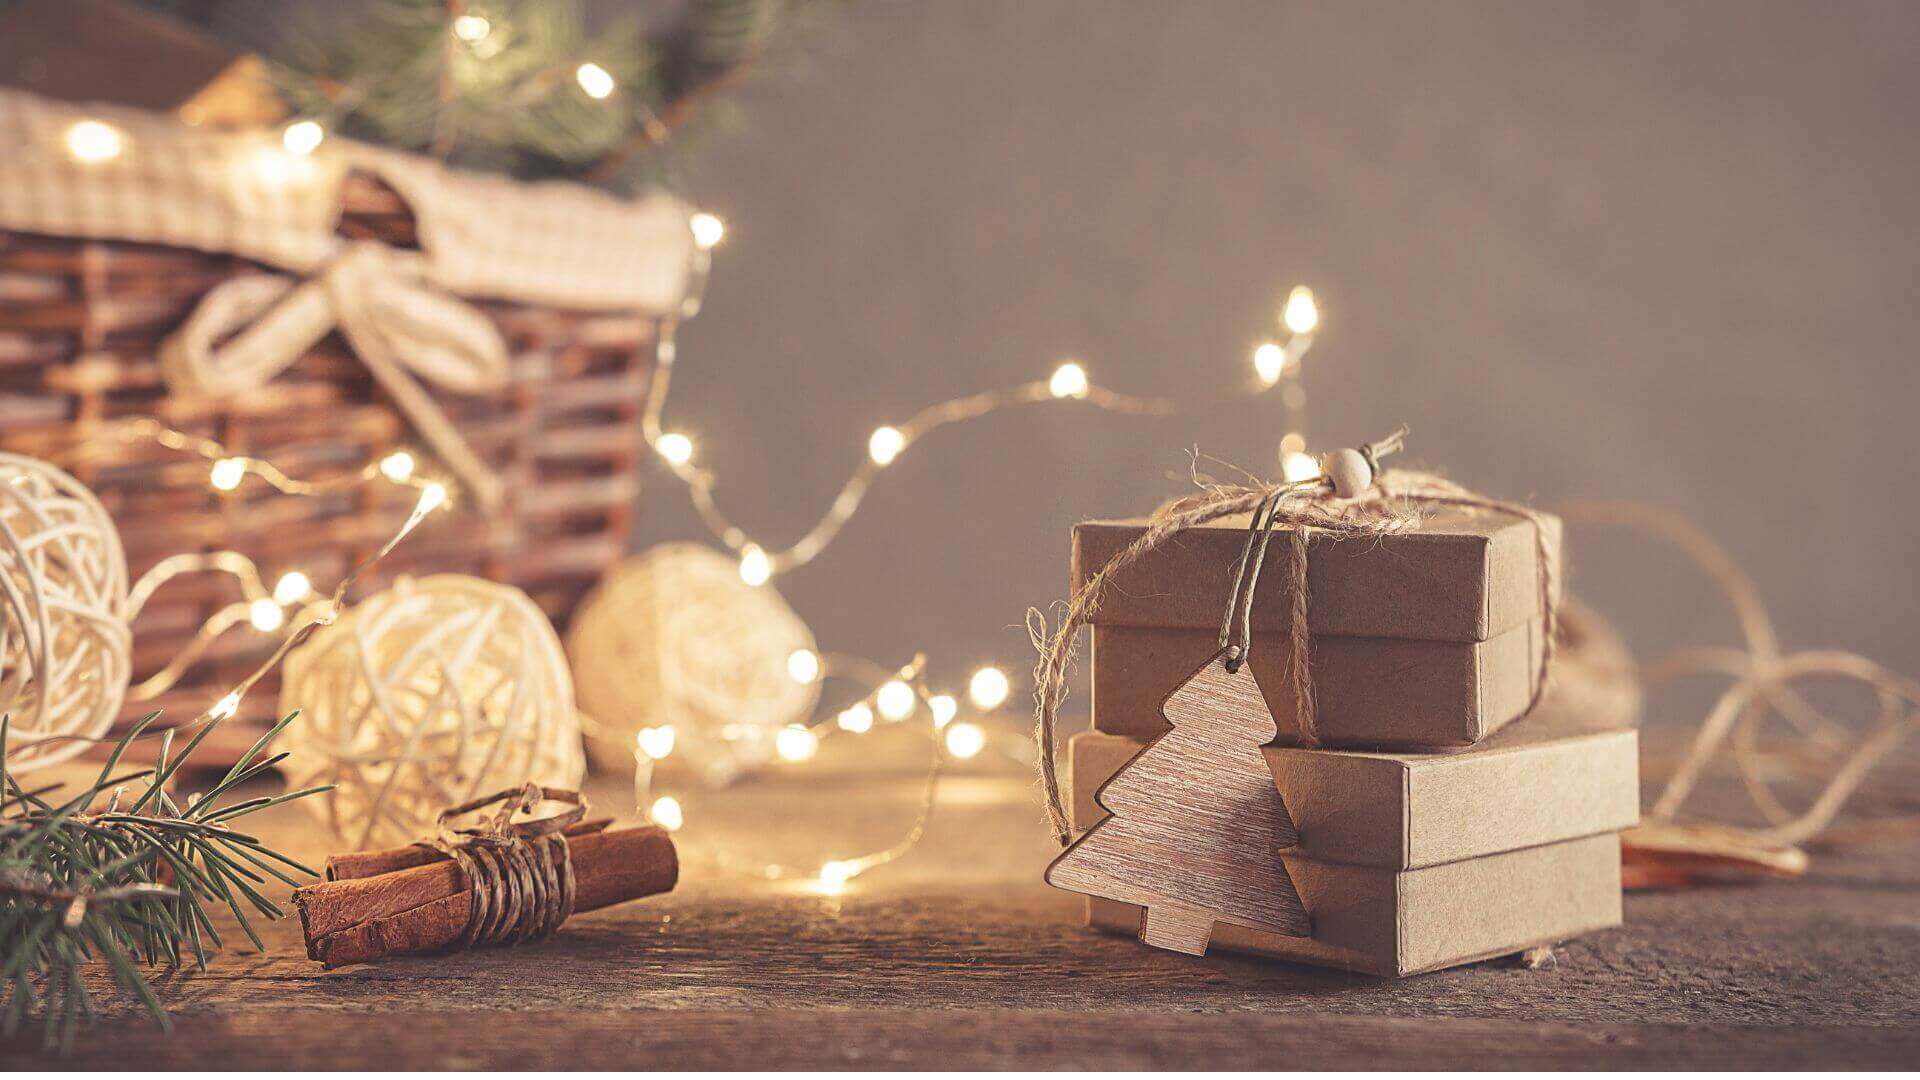 Collombatti Naturals 5 ways to reduce waste over christmas picture of gift boxes with fairy lights behind